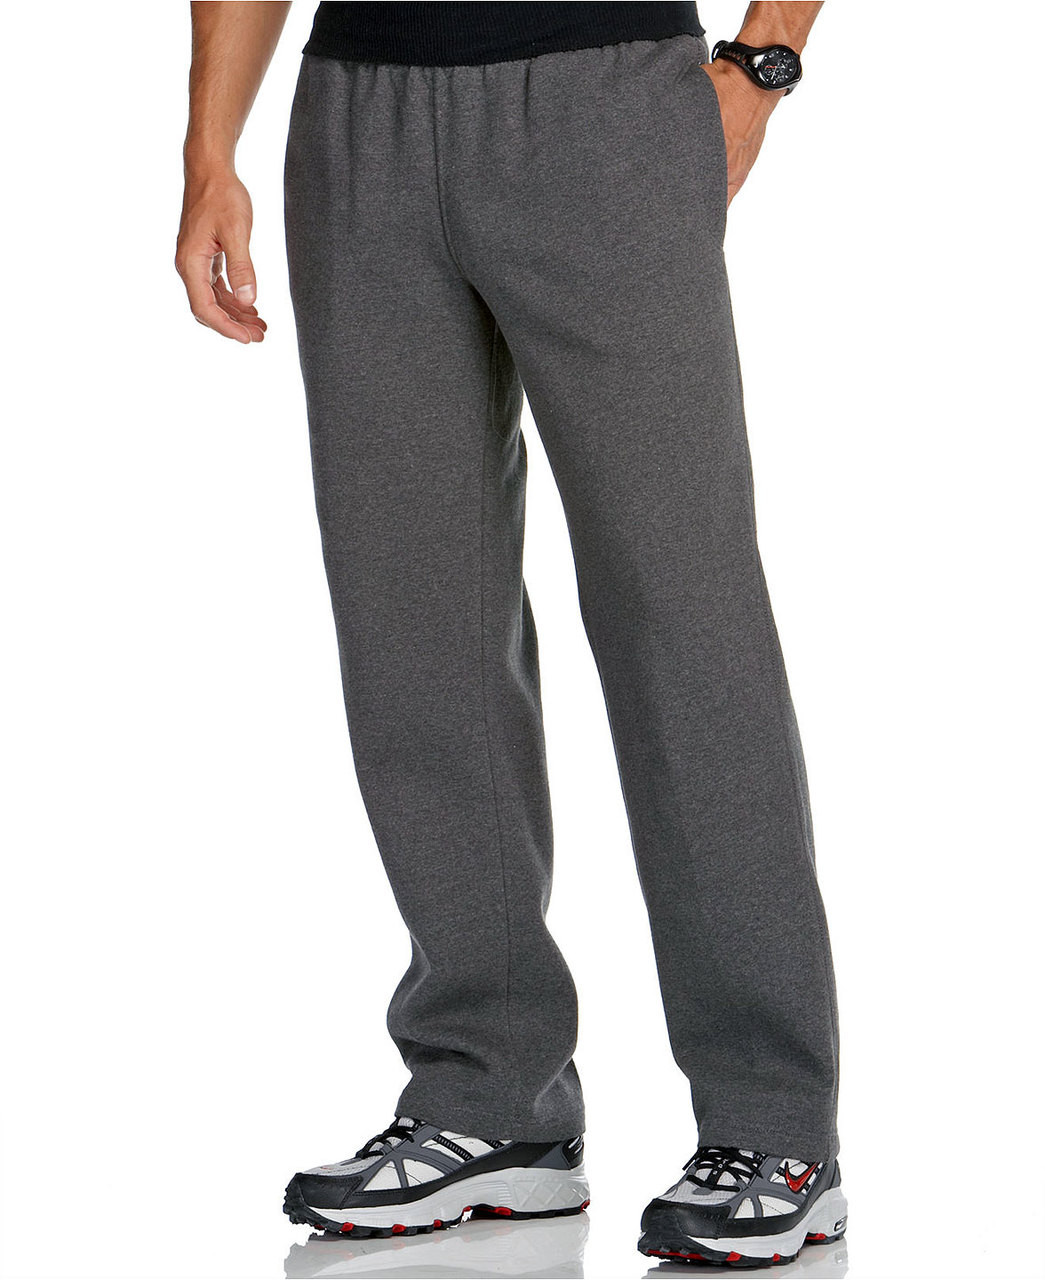 Men's sweatpants | Men's Joggers | Quality Made in USA